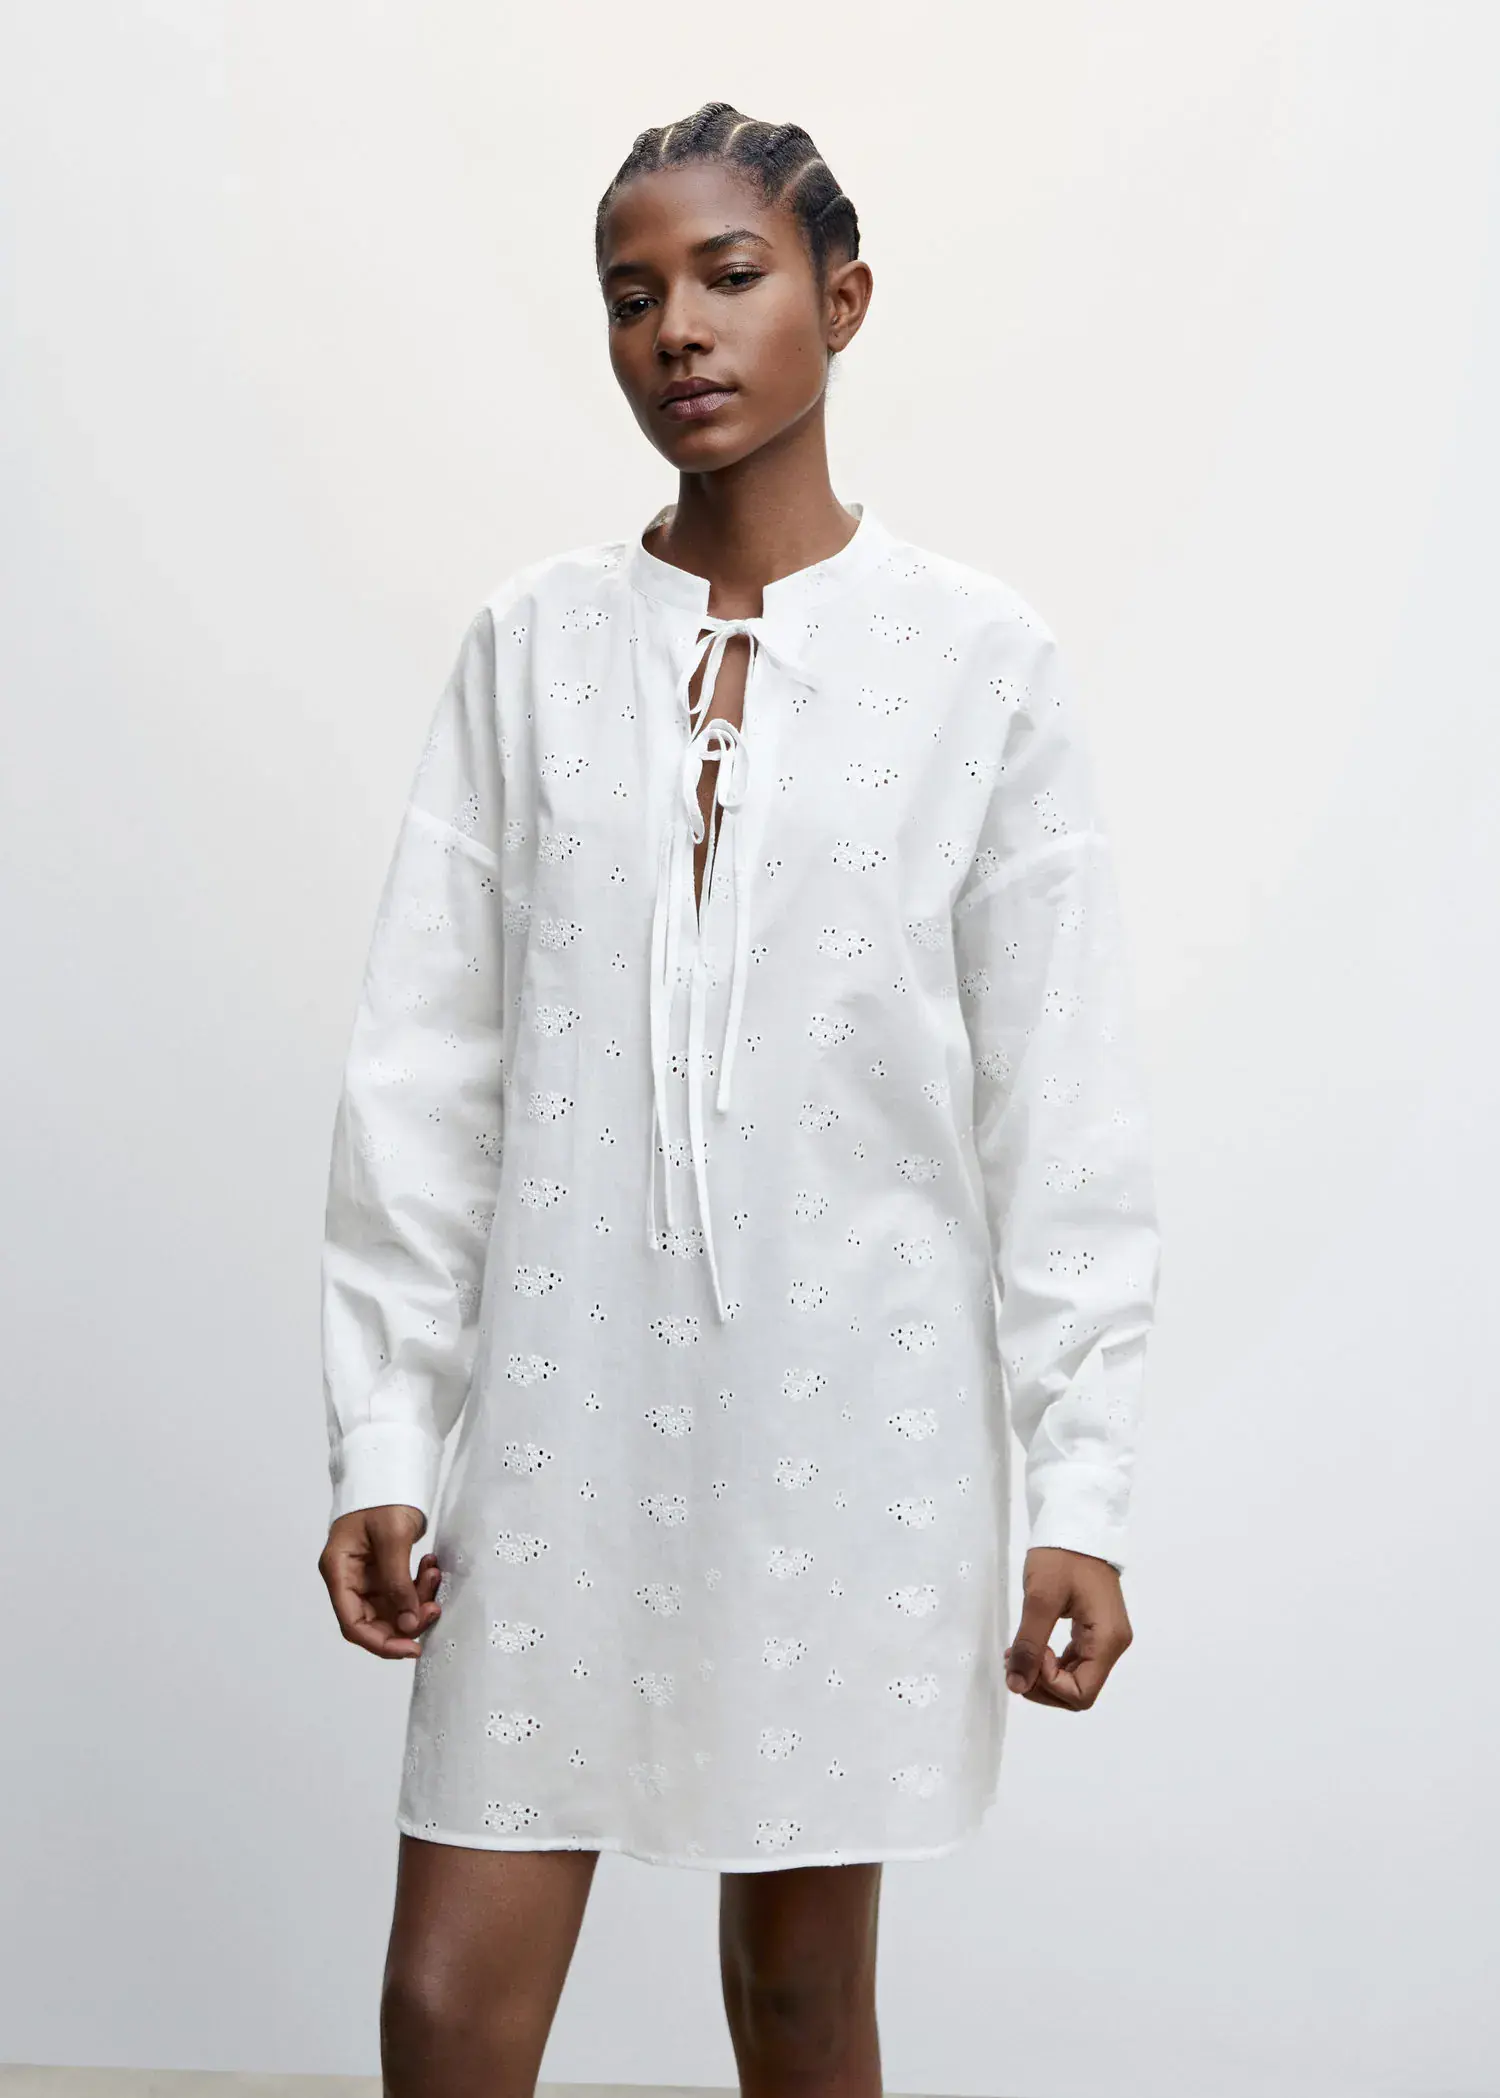 Mango Cotton nightgown with openwork details. a person wearing a white dress standing in front of a wall. 